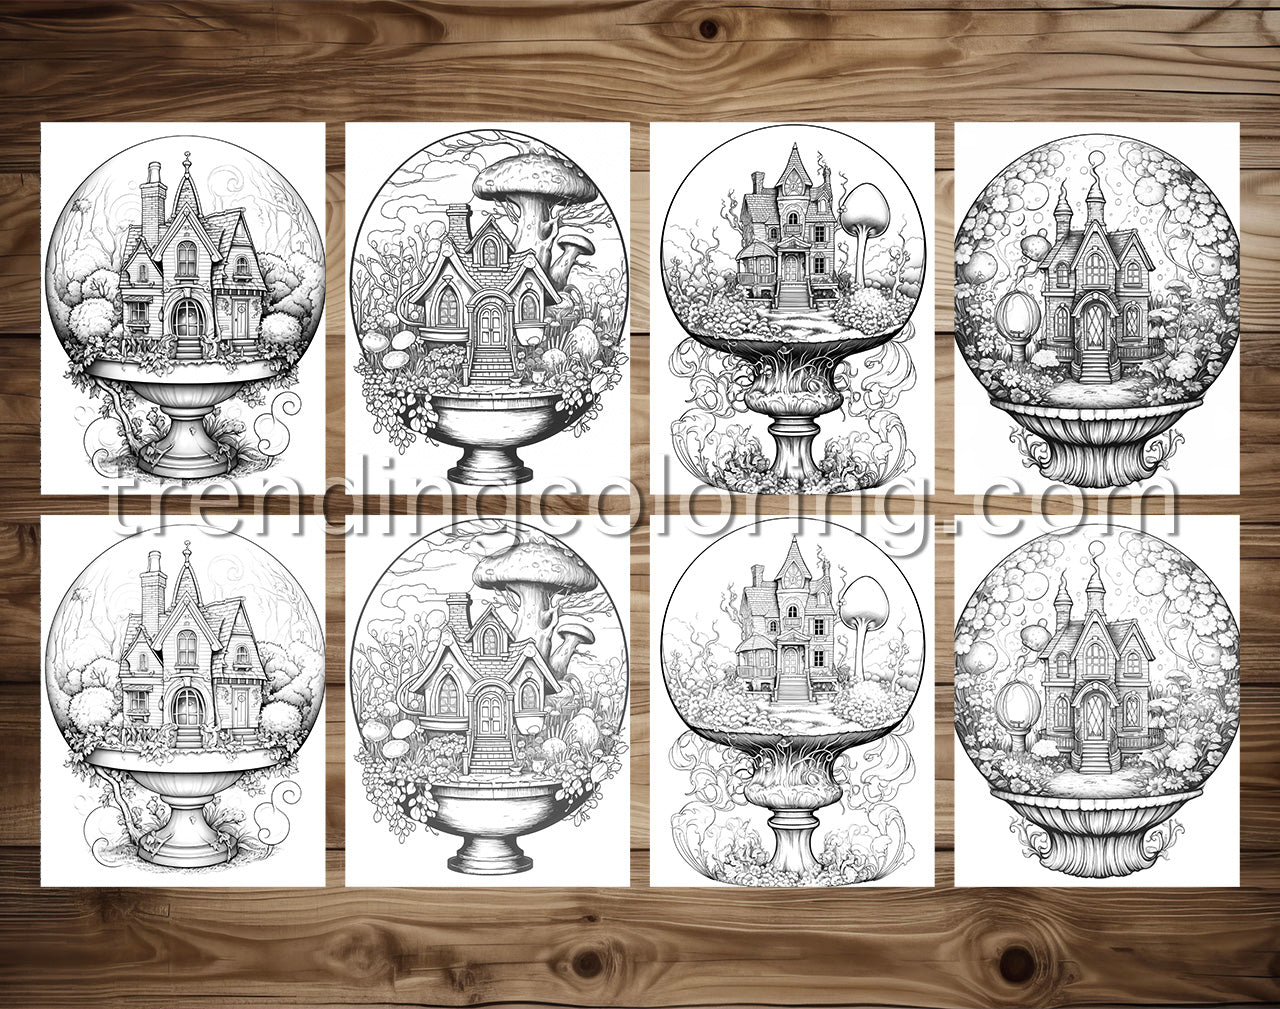 25 Fairy House In Magic Ball Grayscale Coloring Pages - Instant Download - Printable PDF Dark/Light